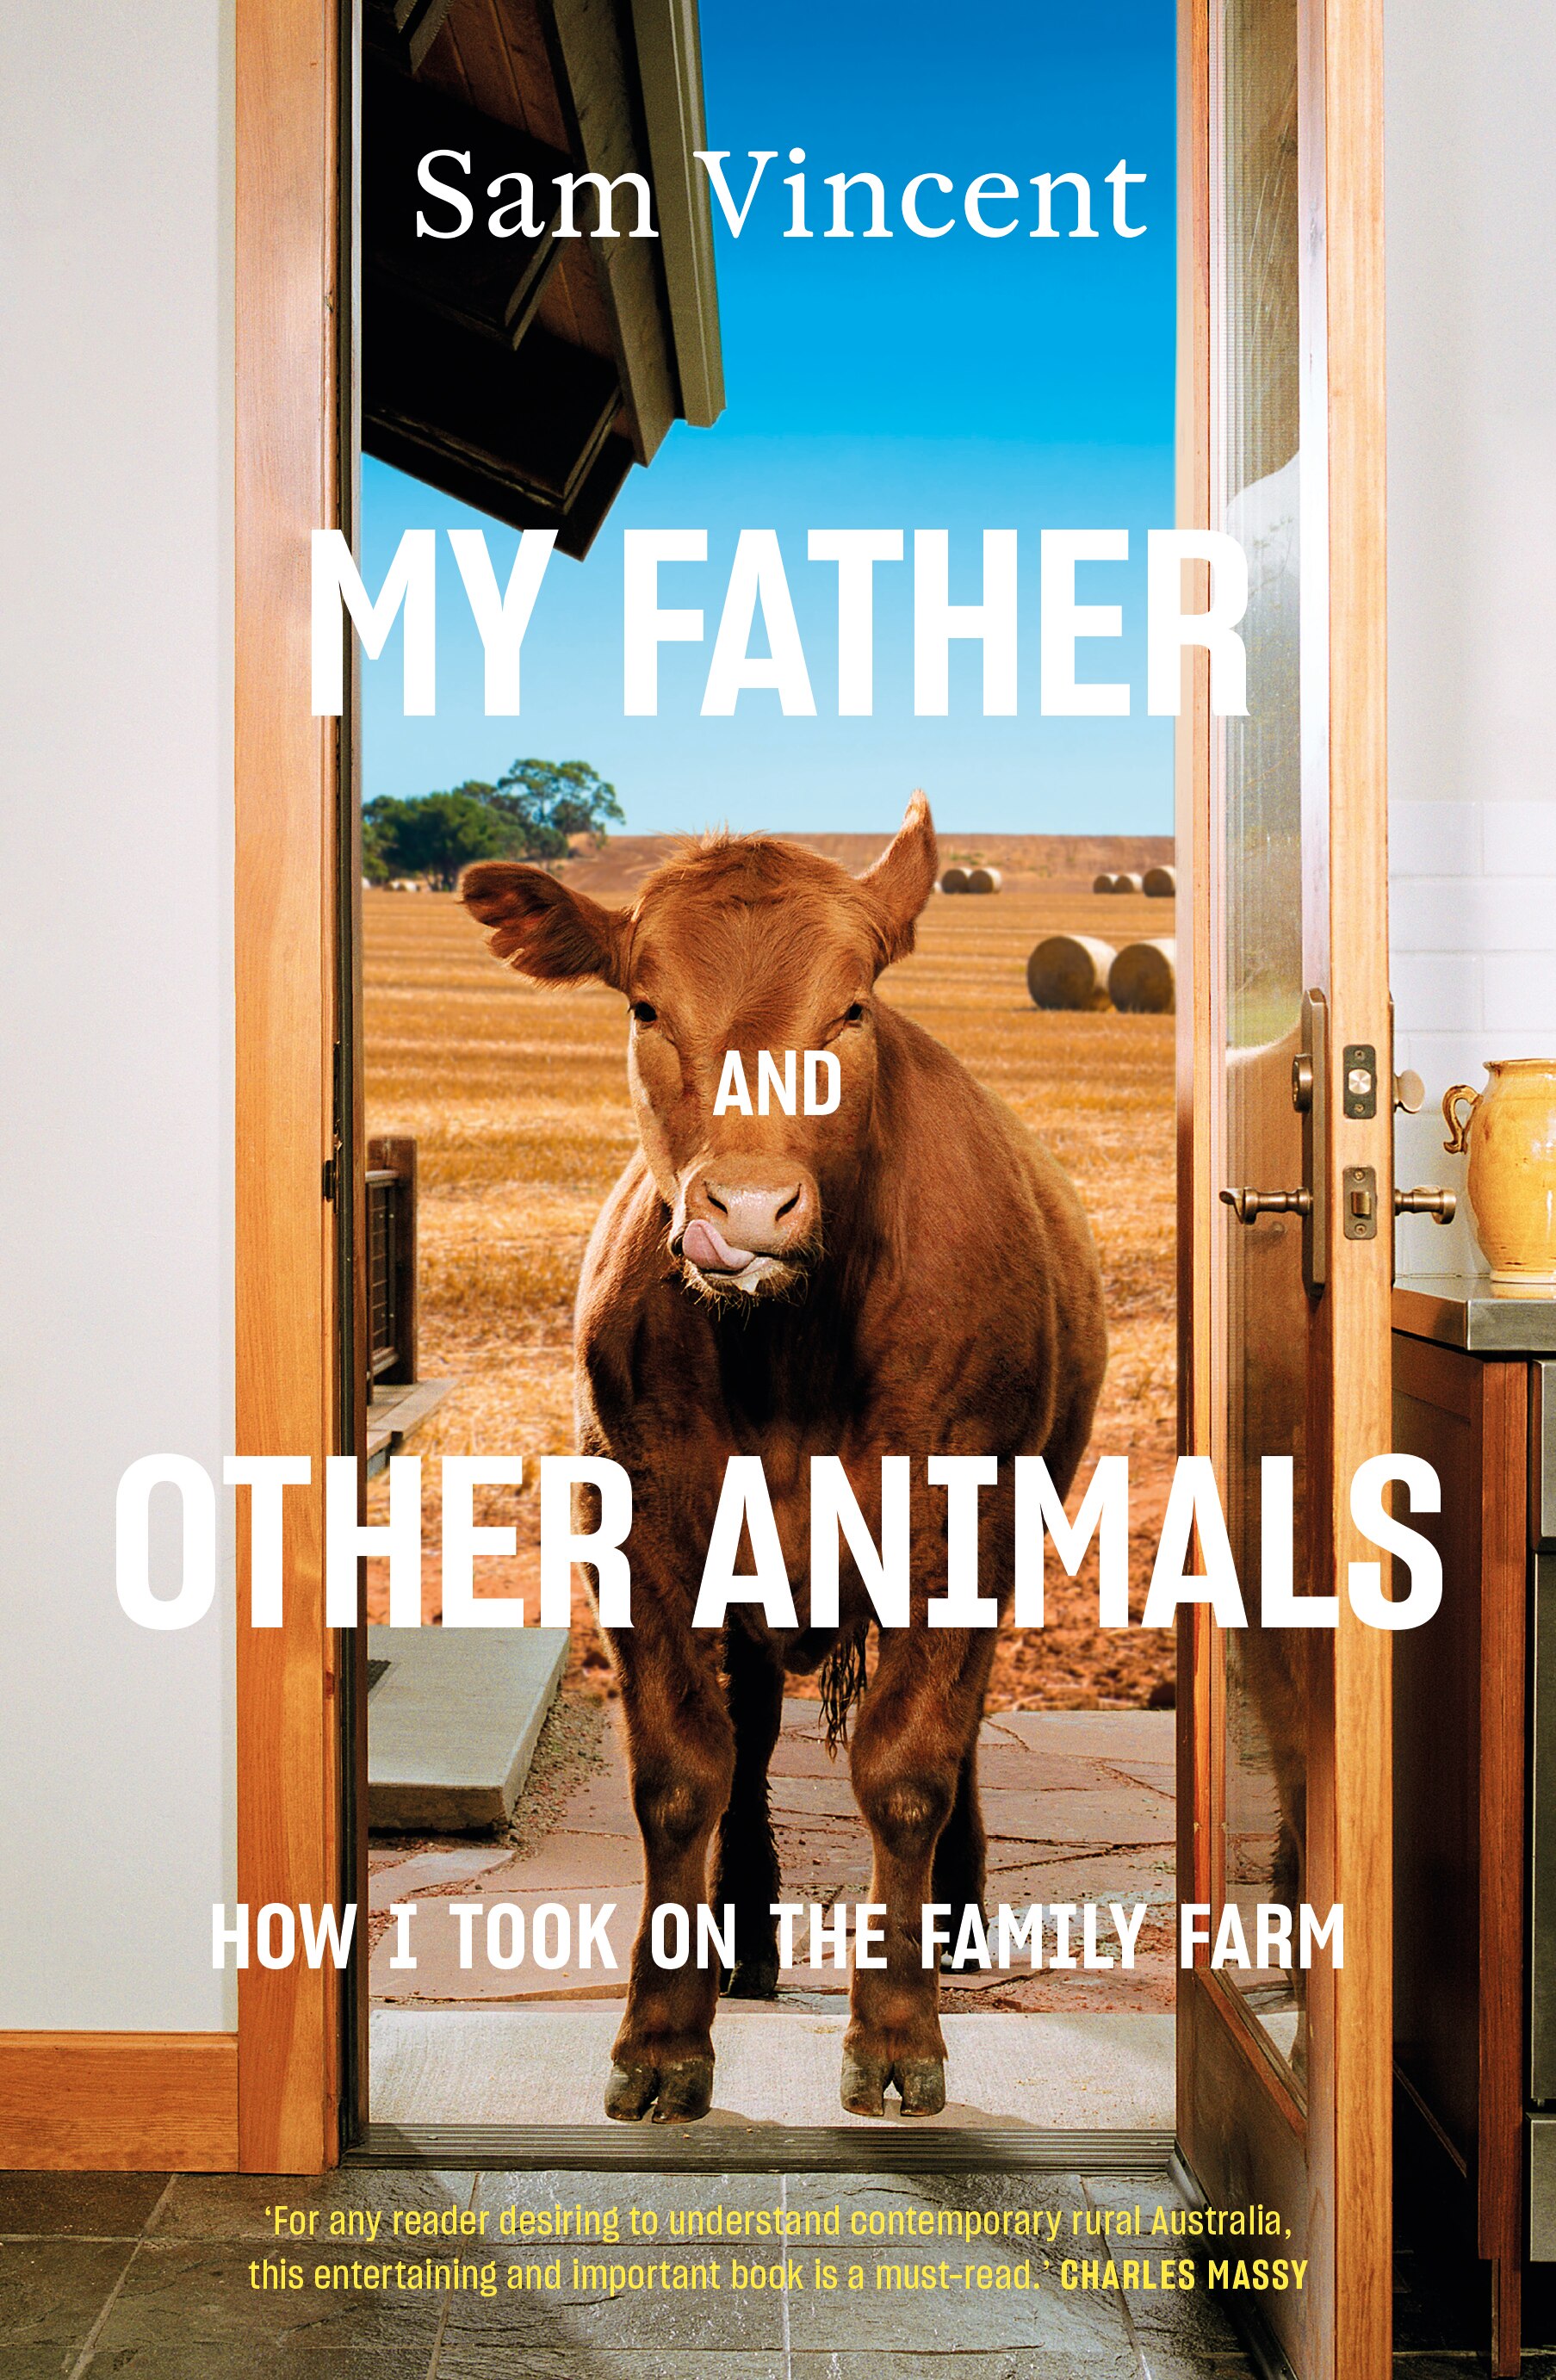 A book cover image features a picture of a cow standing in the doorway of a house with a farm in background.